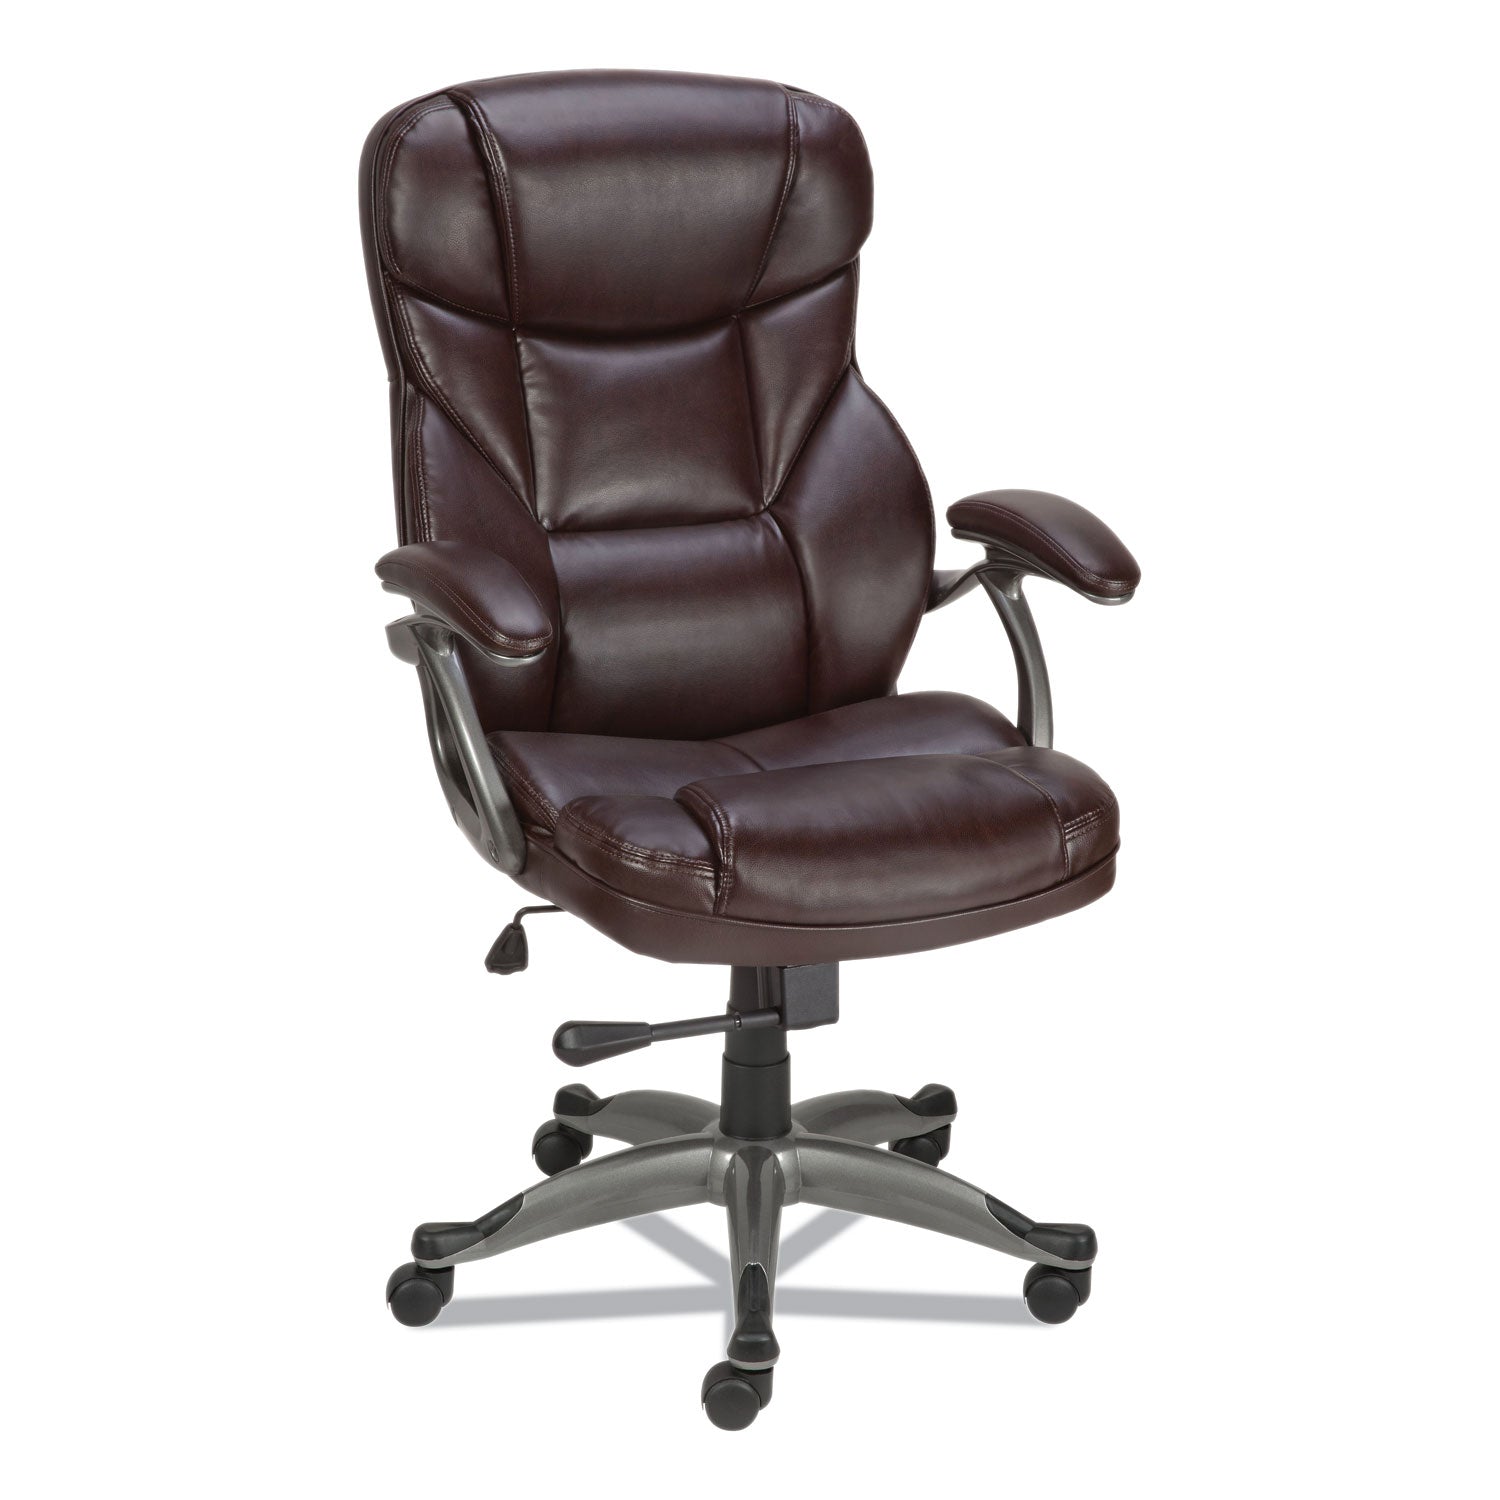 Alera Birns Series High-Back Task Chair, Supports Up to 250 lb, 18.11" to 22.05" Seat Height, Brown Seat/Back, Chrome Base - 2